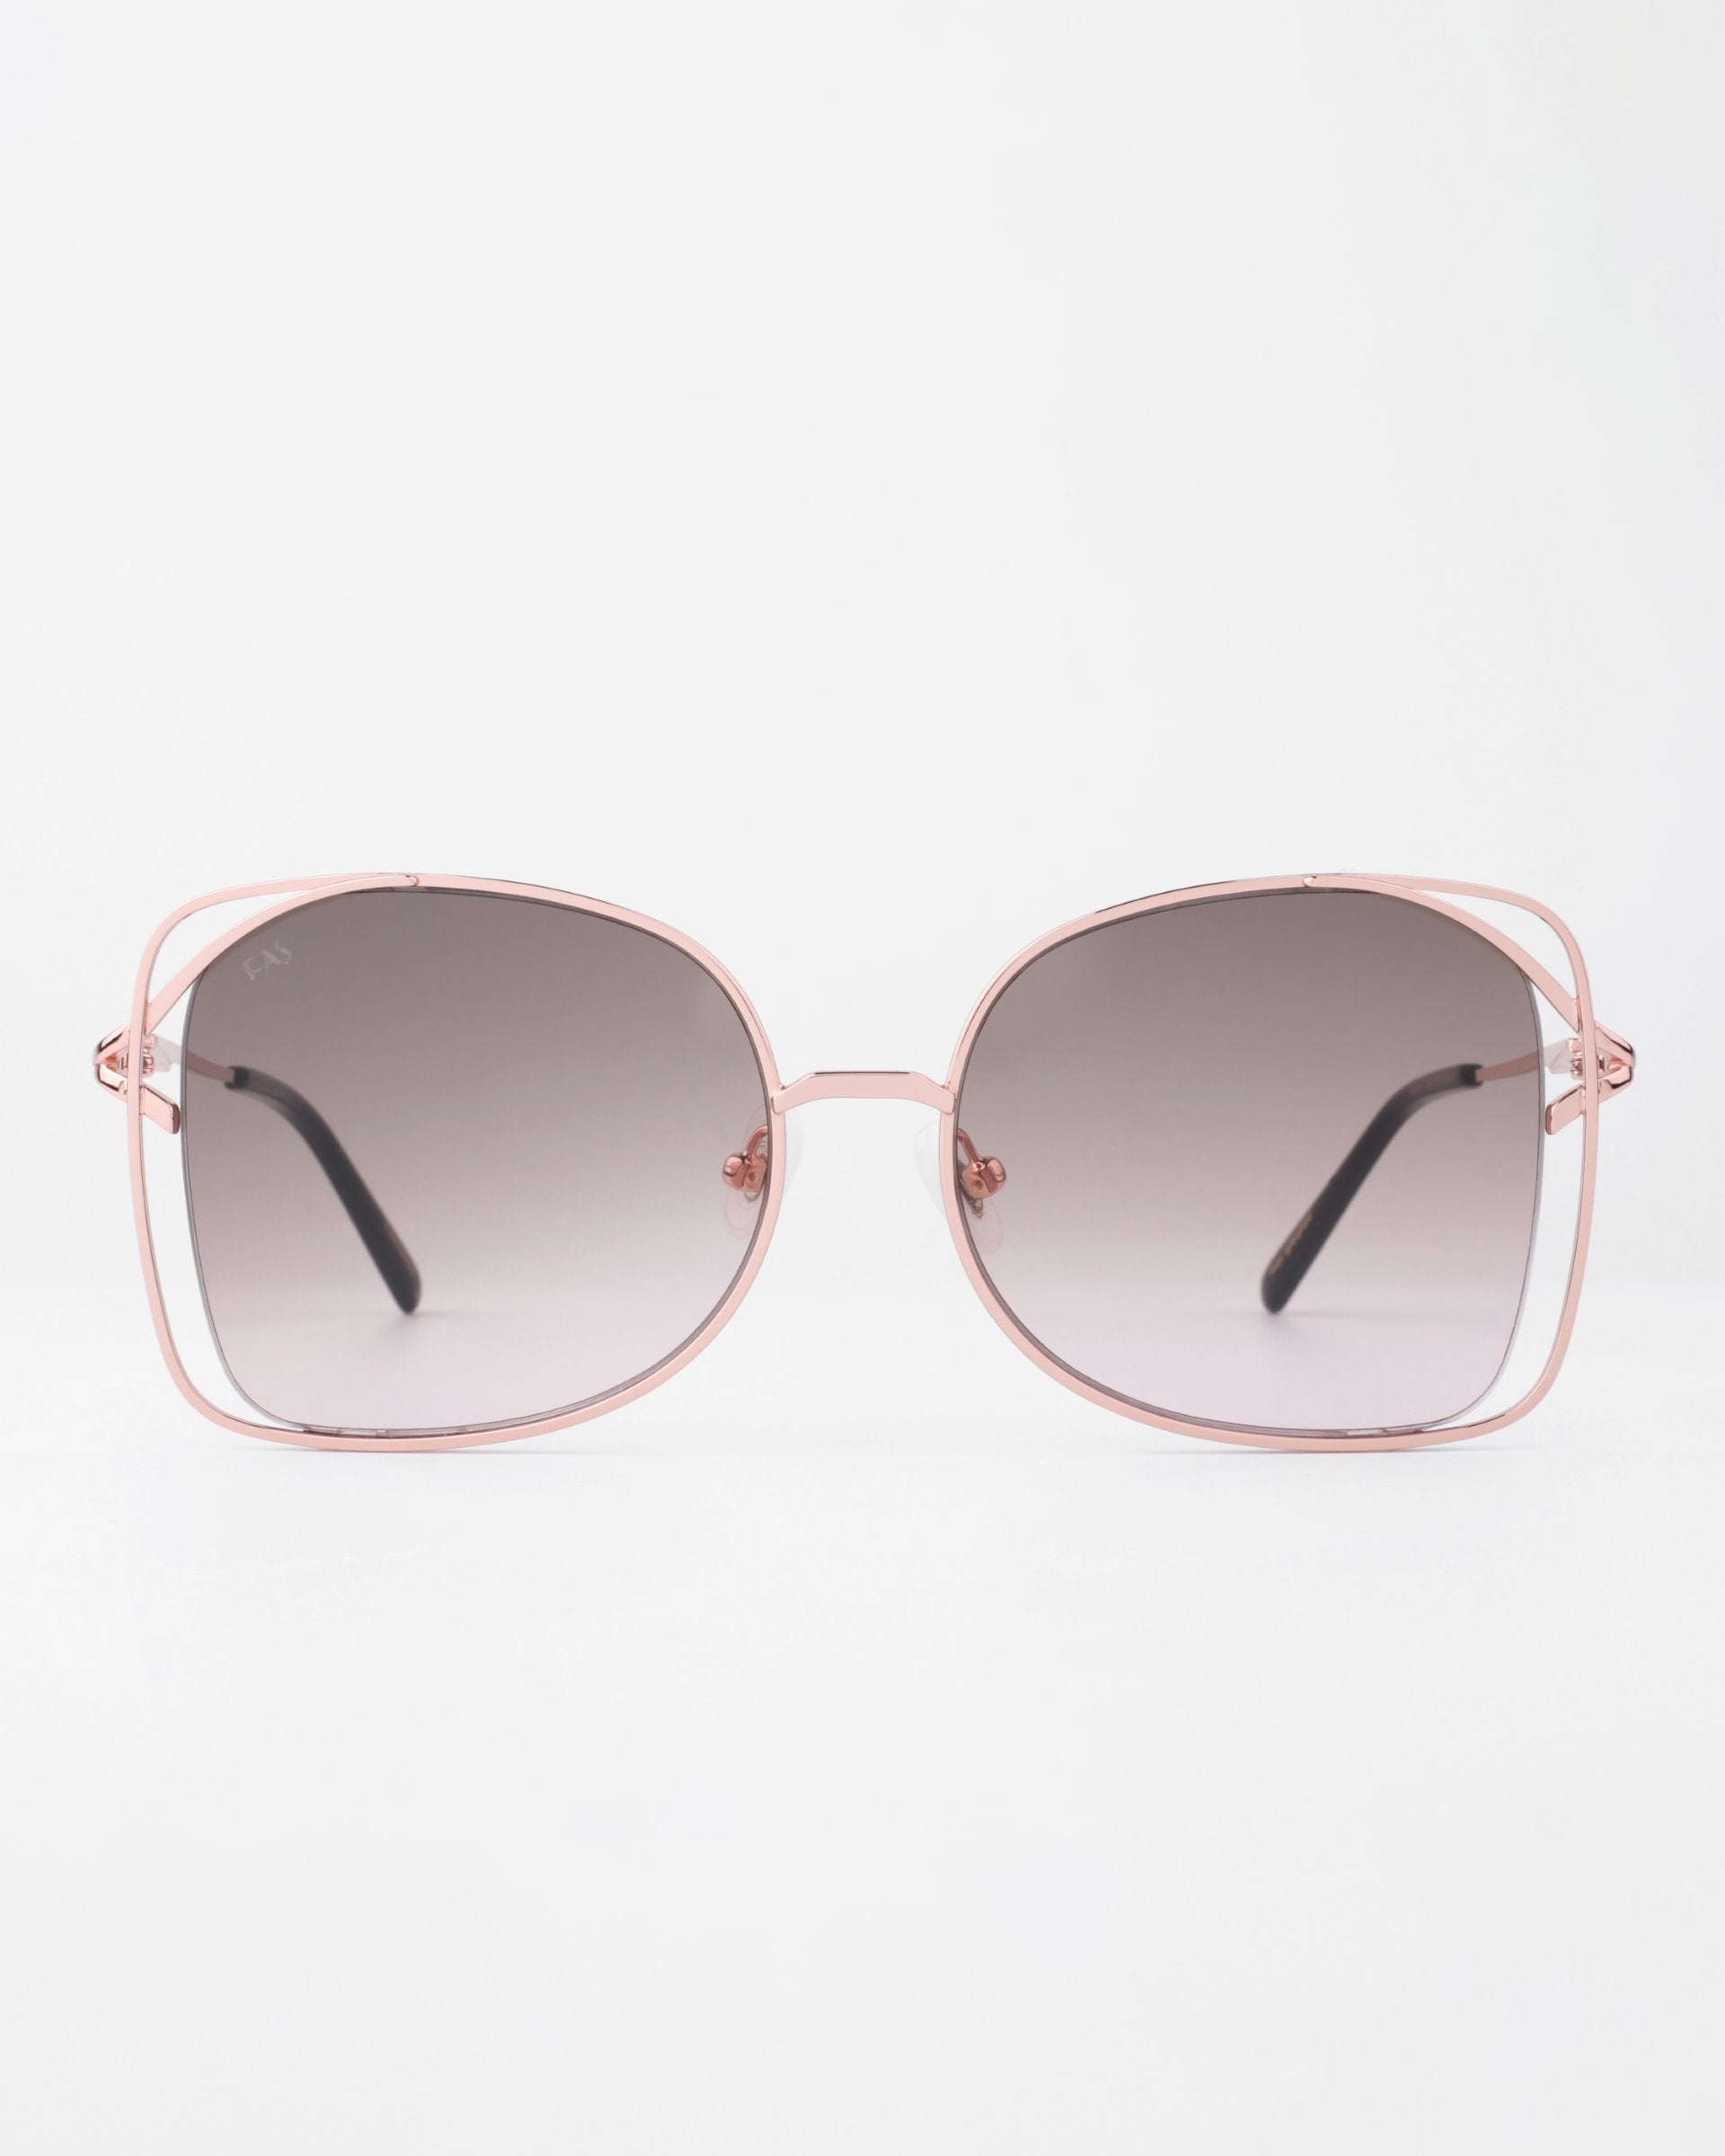 A pair of handmade, large, square-shaped Carousel sunglasses by For Art&#39;s Sake® with a thin, pink metal frame and gradient dark to light lenses. Crafted with gold-plated stainless steel for durability and style, they offer full UVA &amp; UVB protection. The glasses are displayed against a plain white background with the temples extended outward.